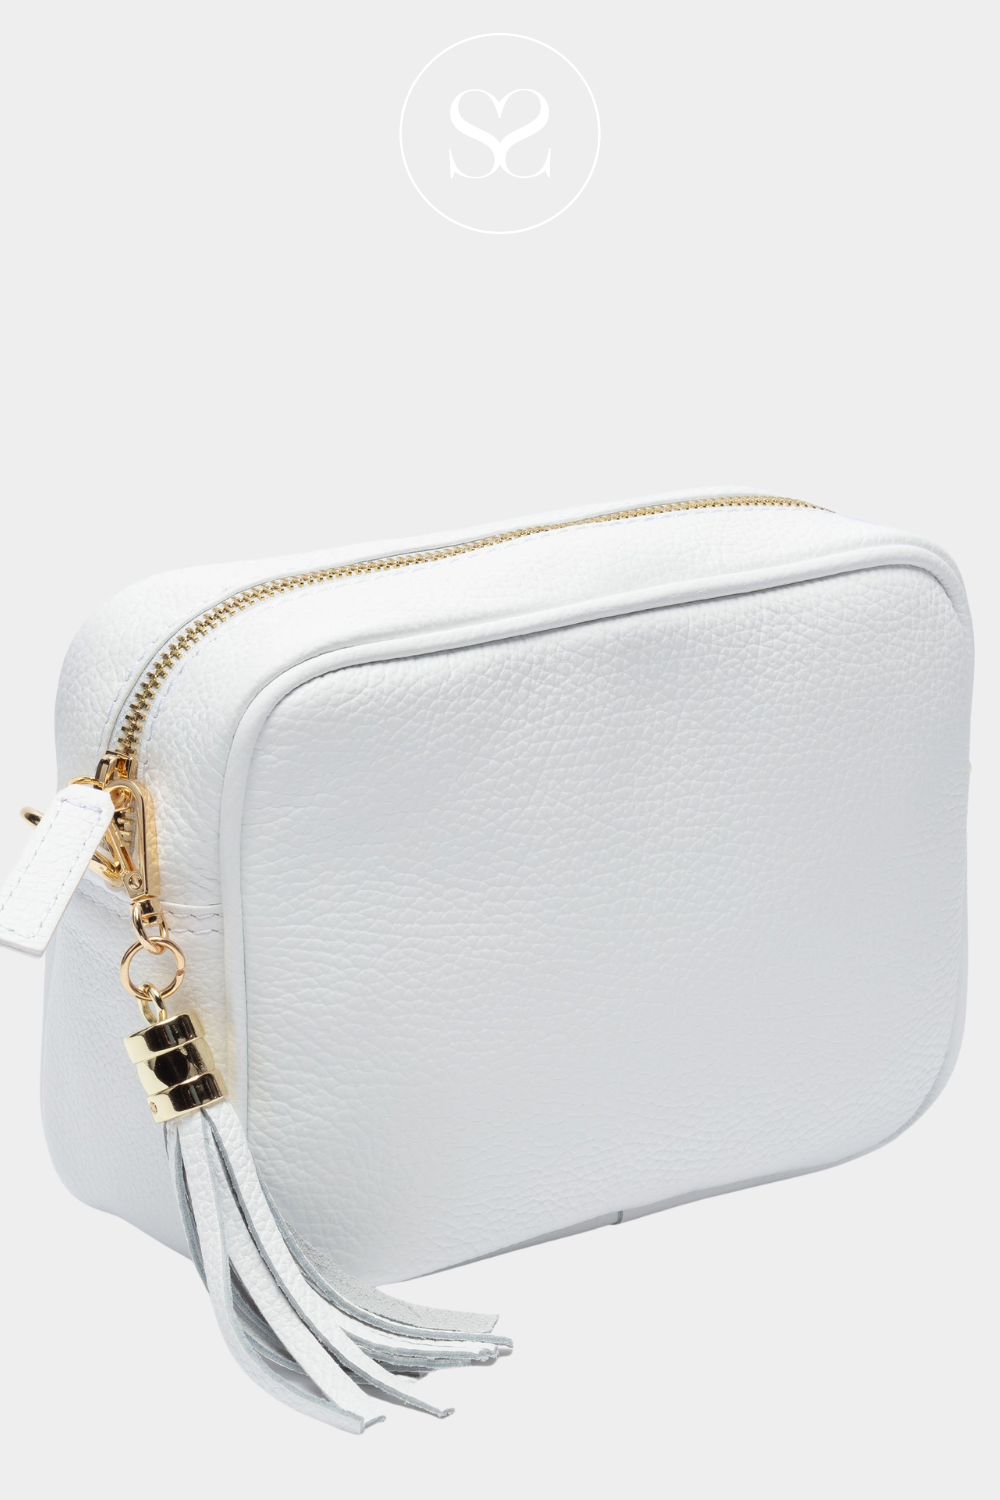 ELIE BEAUMONT WHITE CROSSBODY BAG WITH TASSLE AND GOLD ZIP